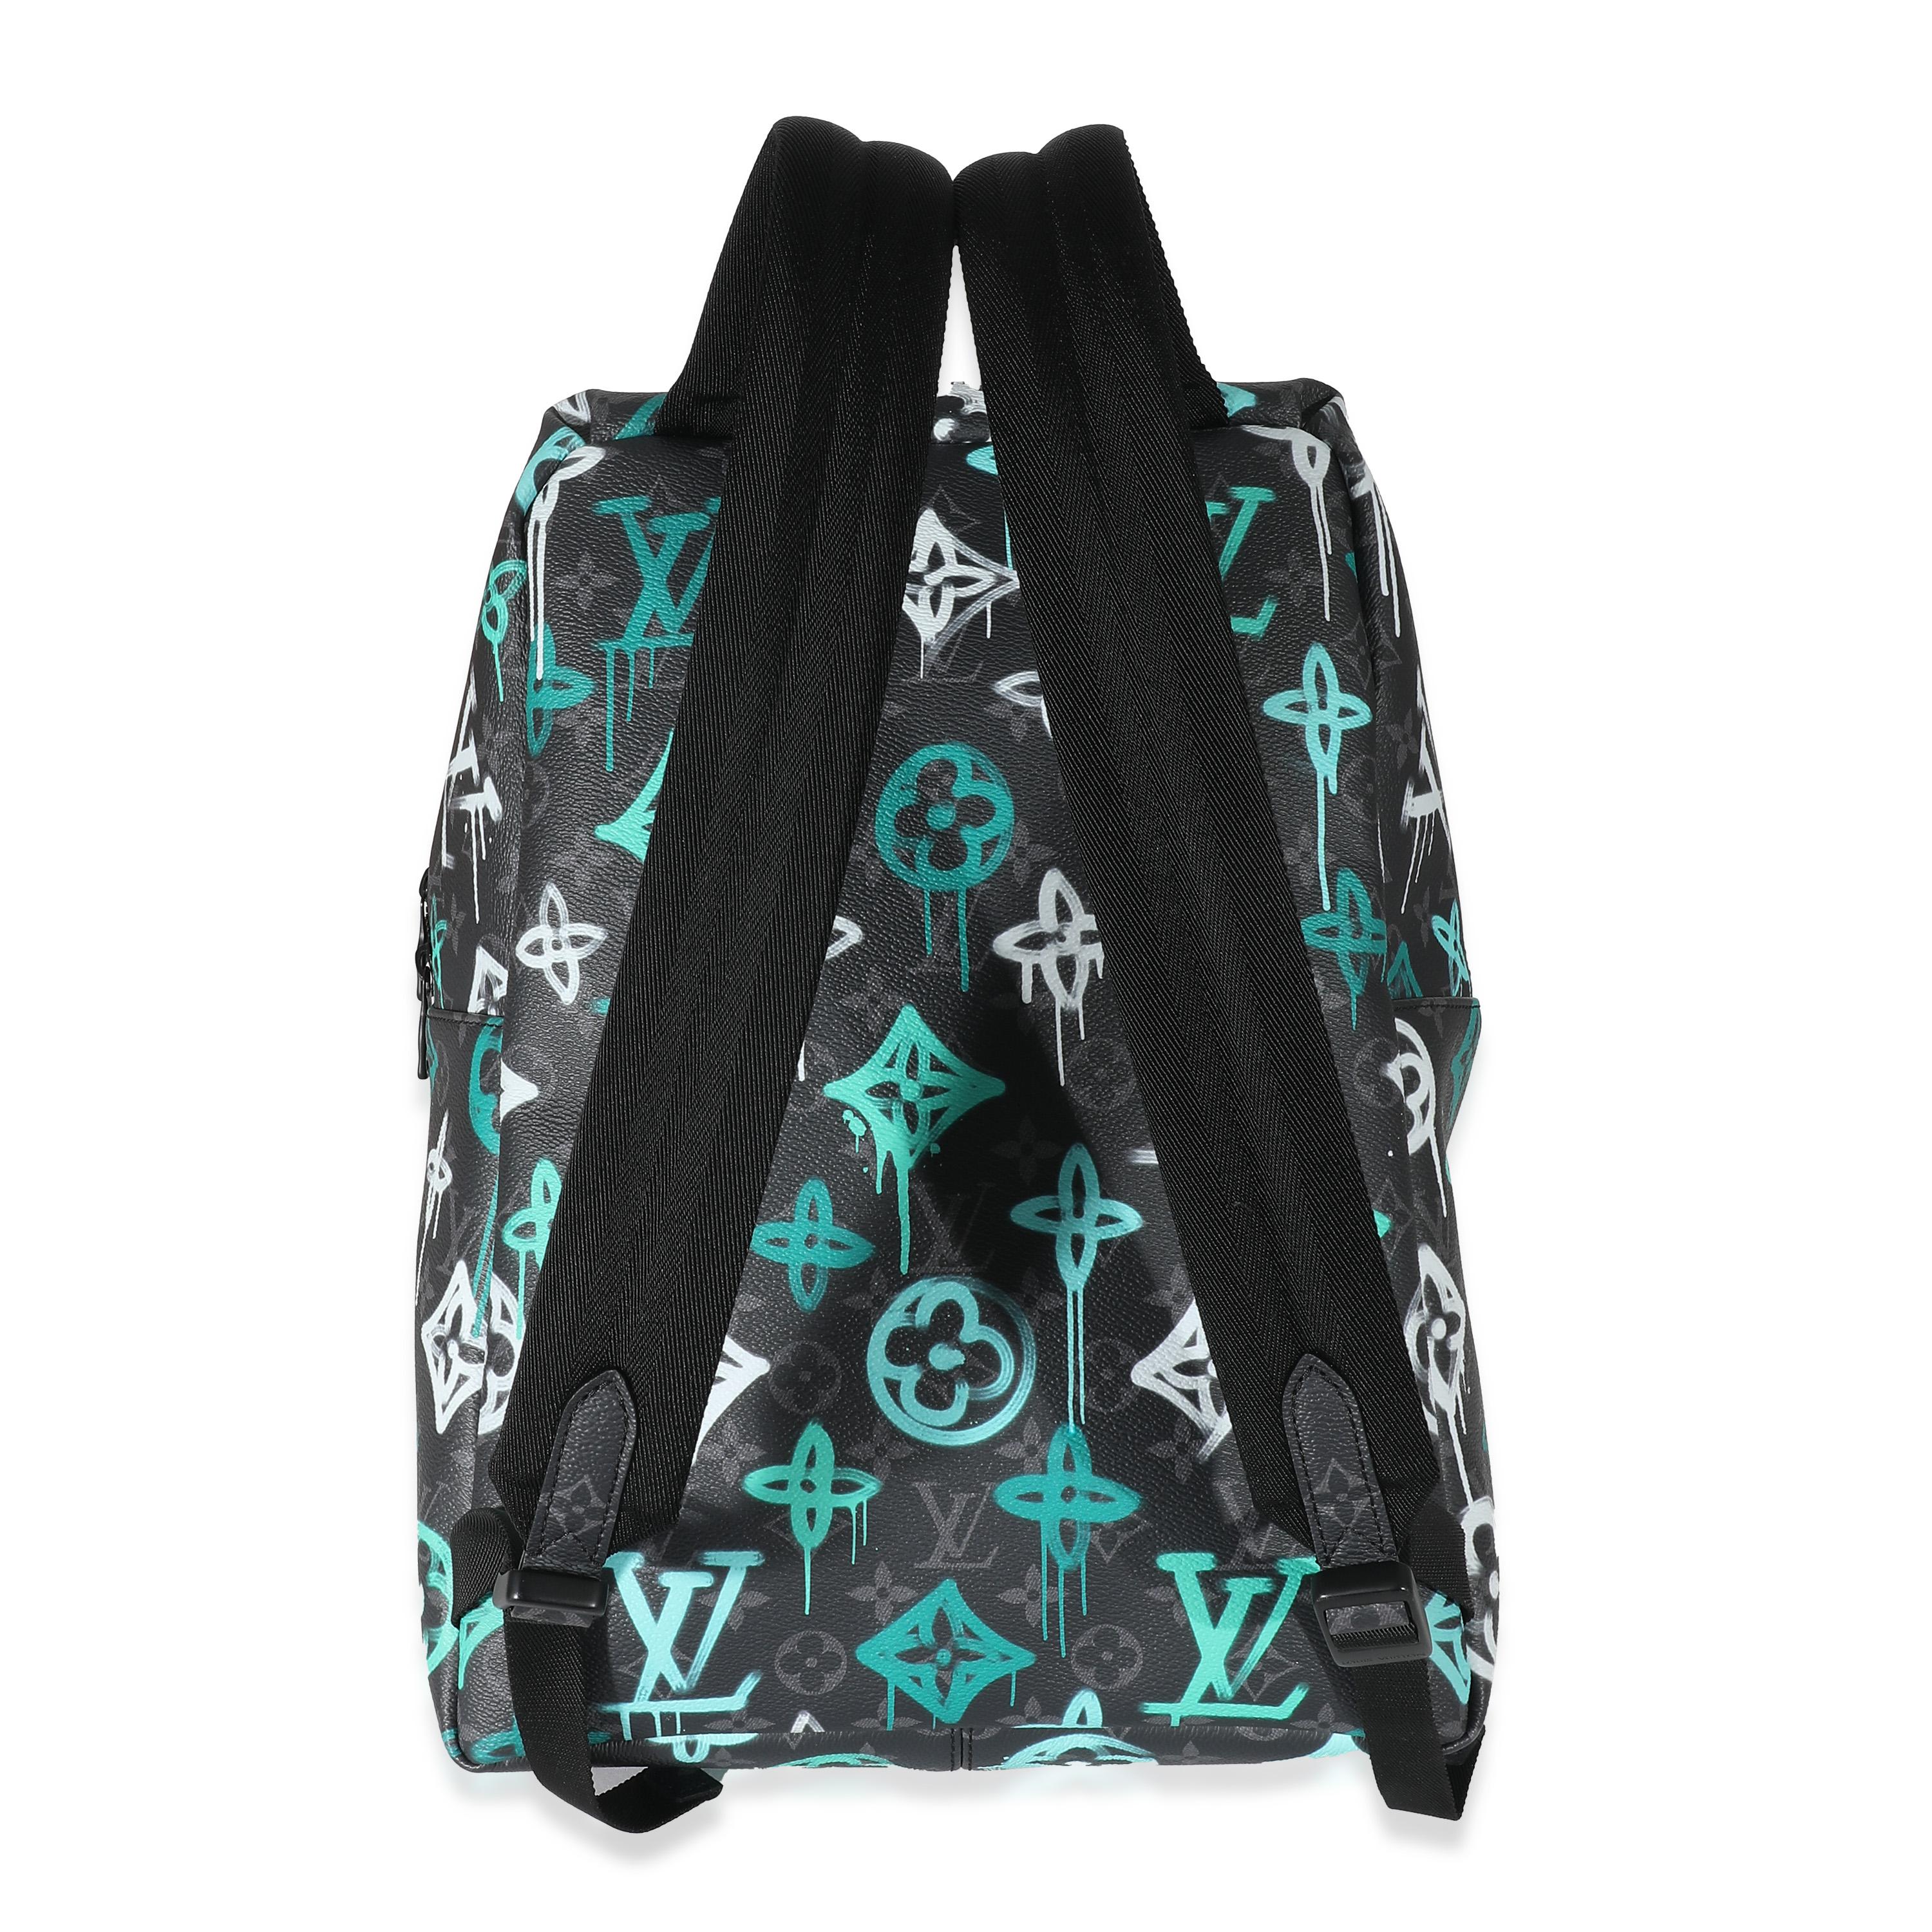 Listing Title: Louis Vuitton Graffiti Monogram Eclipse Canvas Discovery Backpack
SKU: 133536
MSRP: 2990.00 USD
Condition: Pre-owned 
Handbag Condition: Excellent
Condition Comments: Item is in excellent condition and displays light signs of wear.